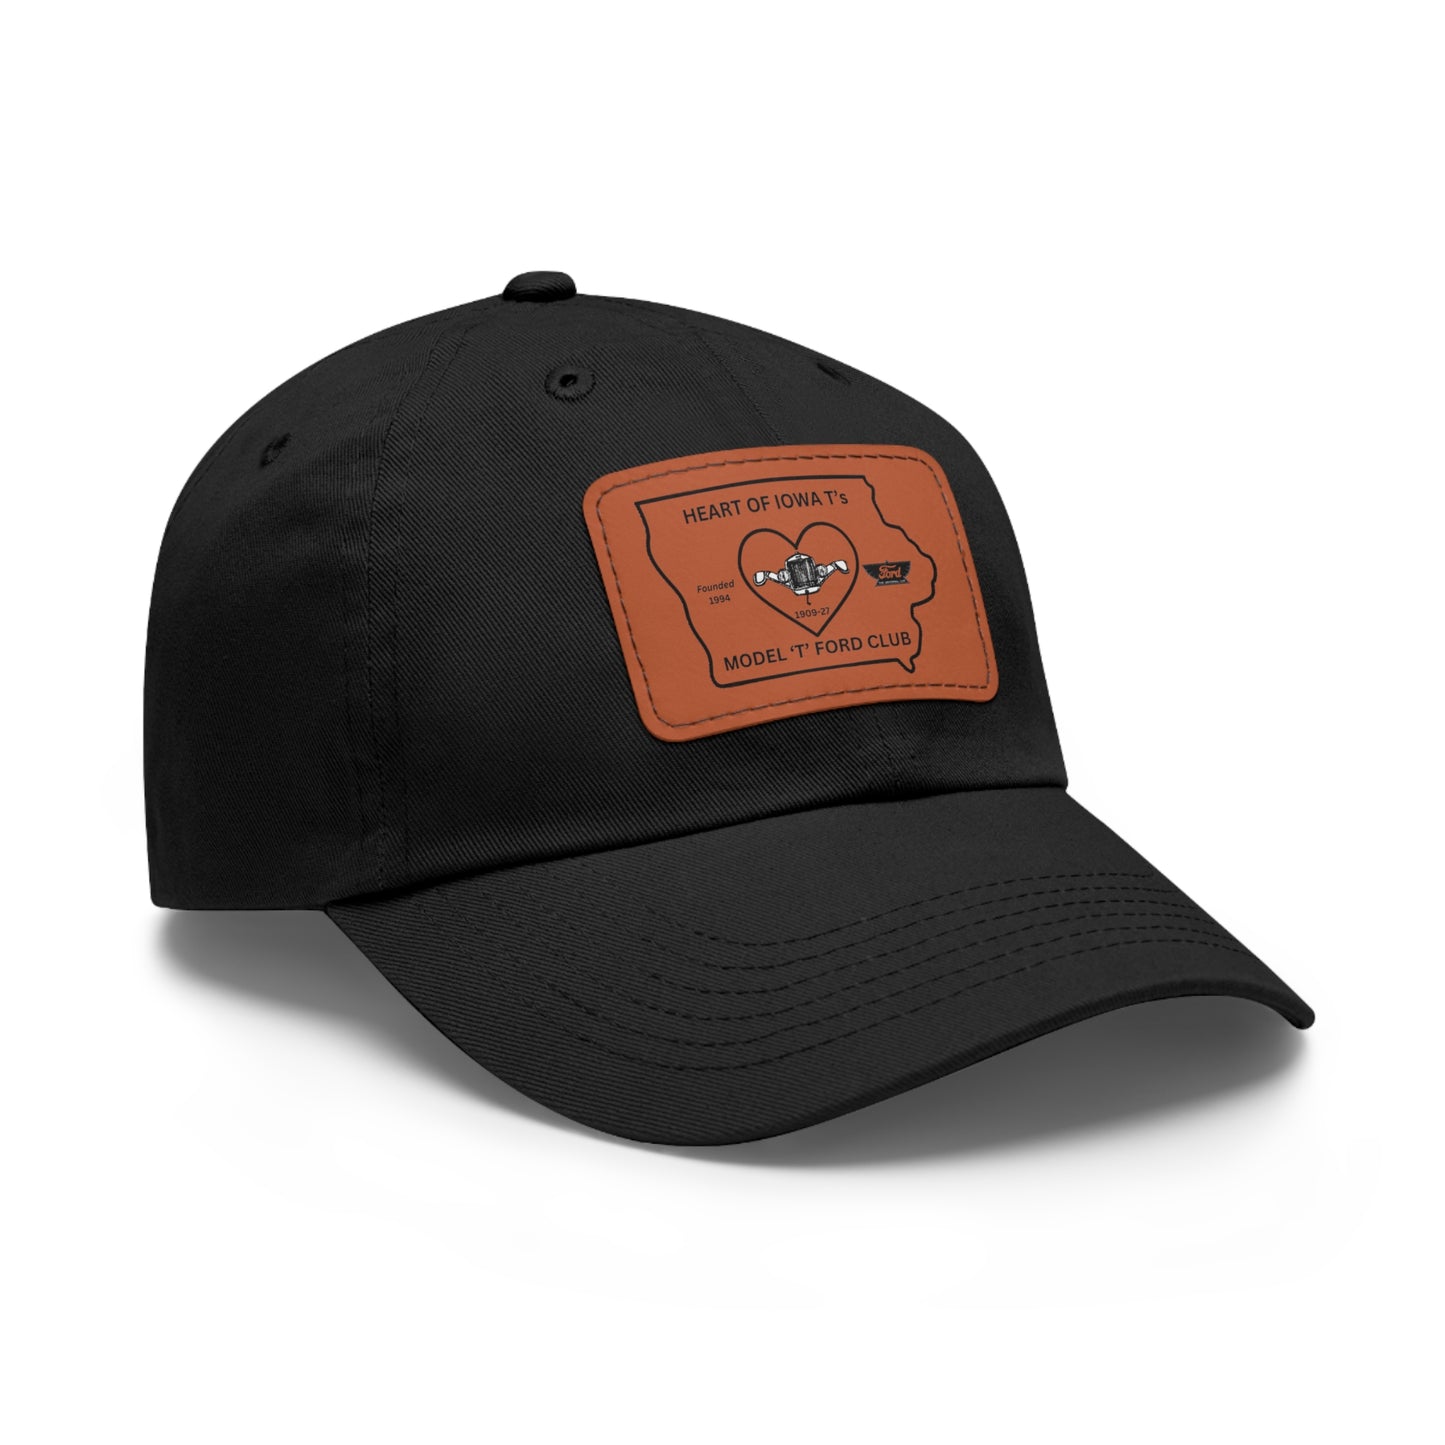 Heart of Iowa T's Dad Hat with Leather Patch (Rectangle)